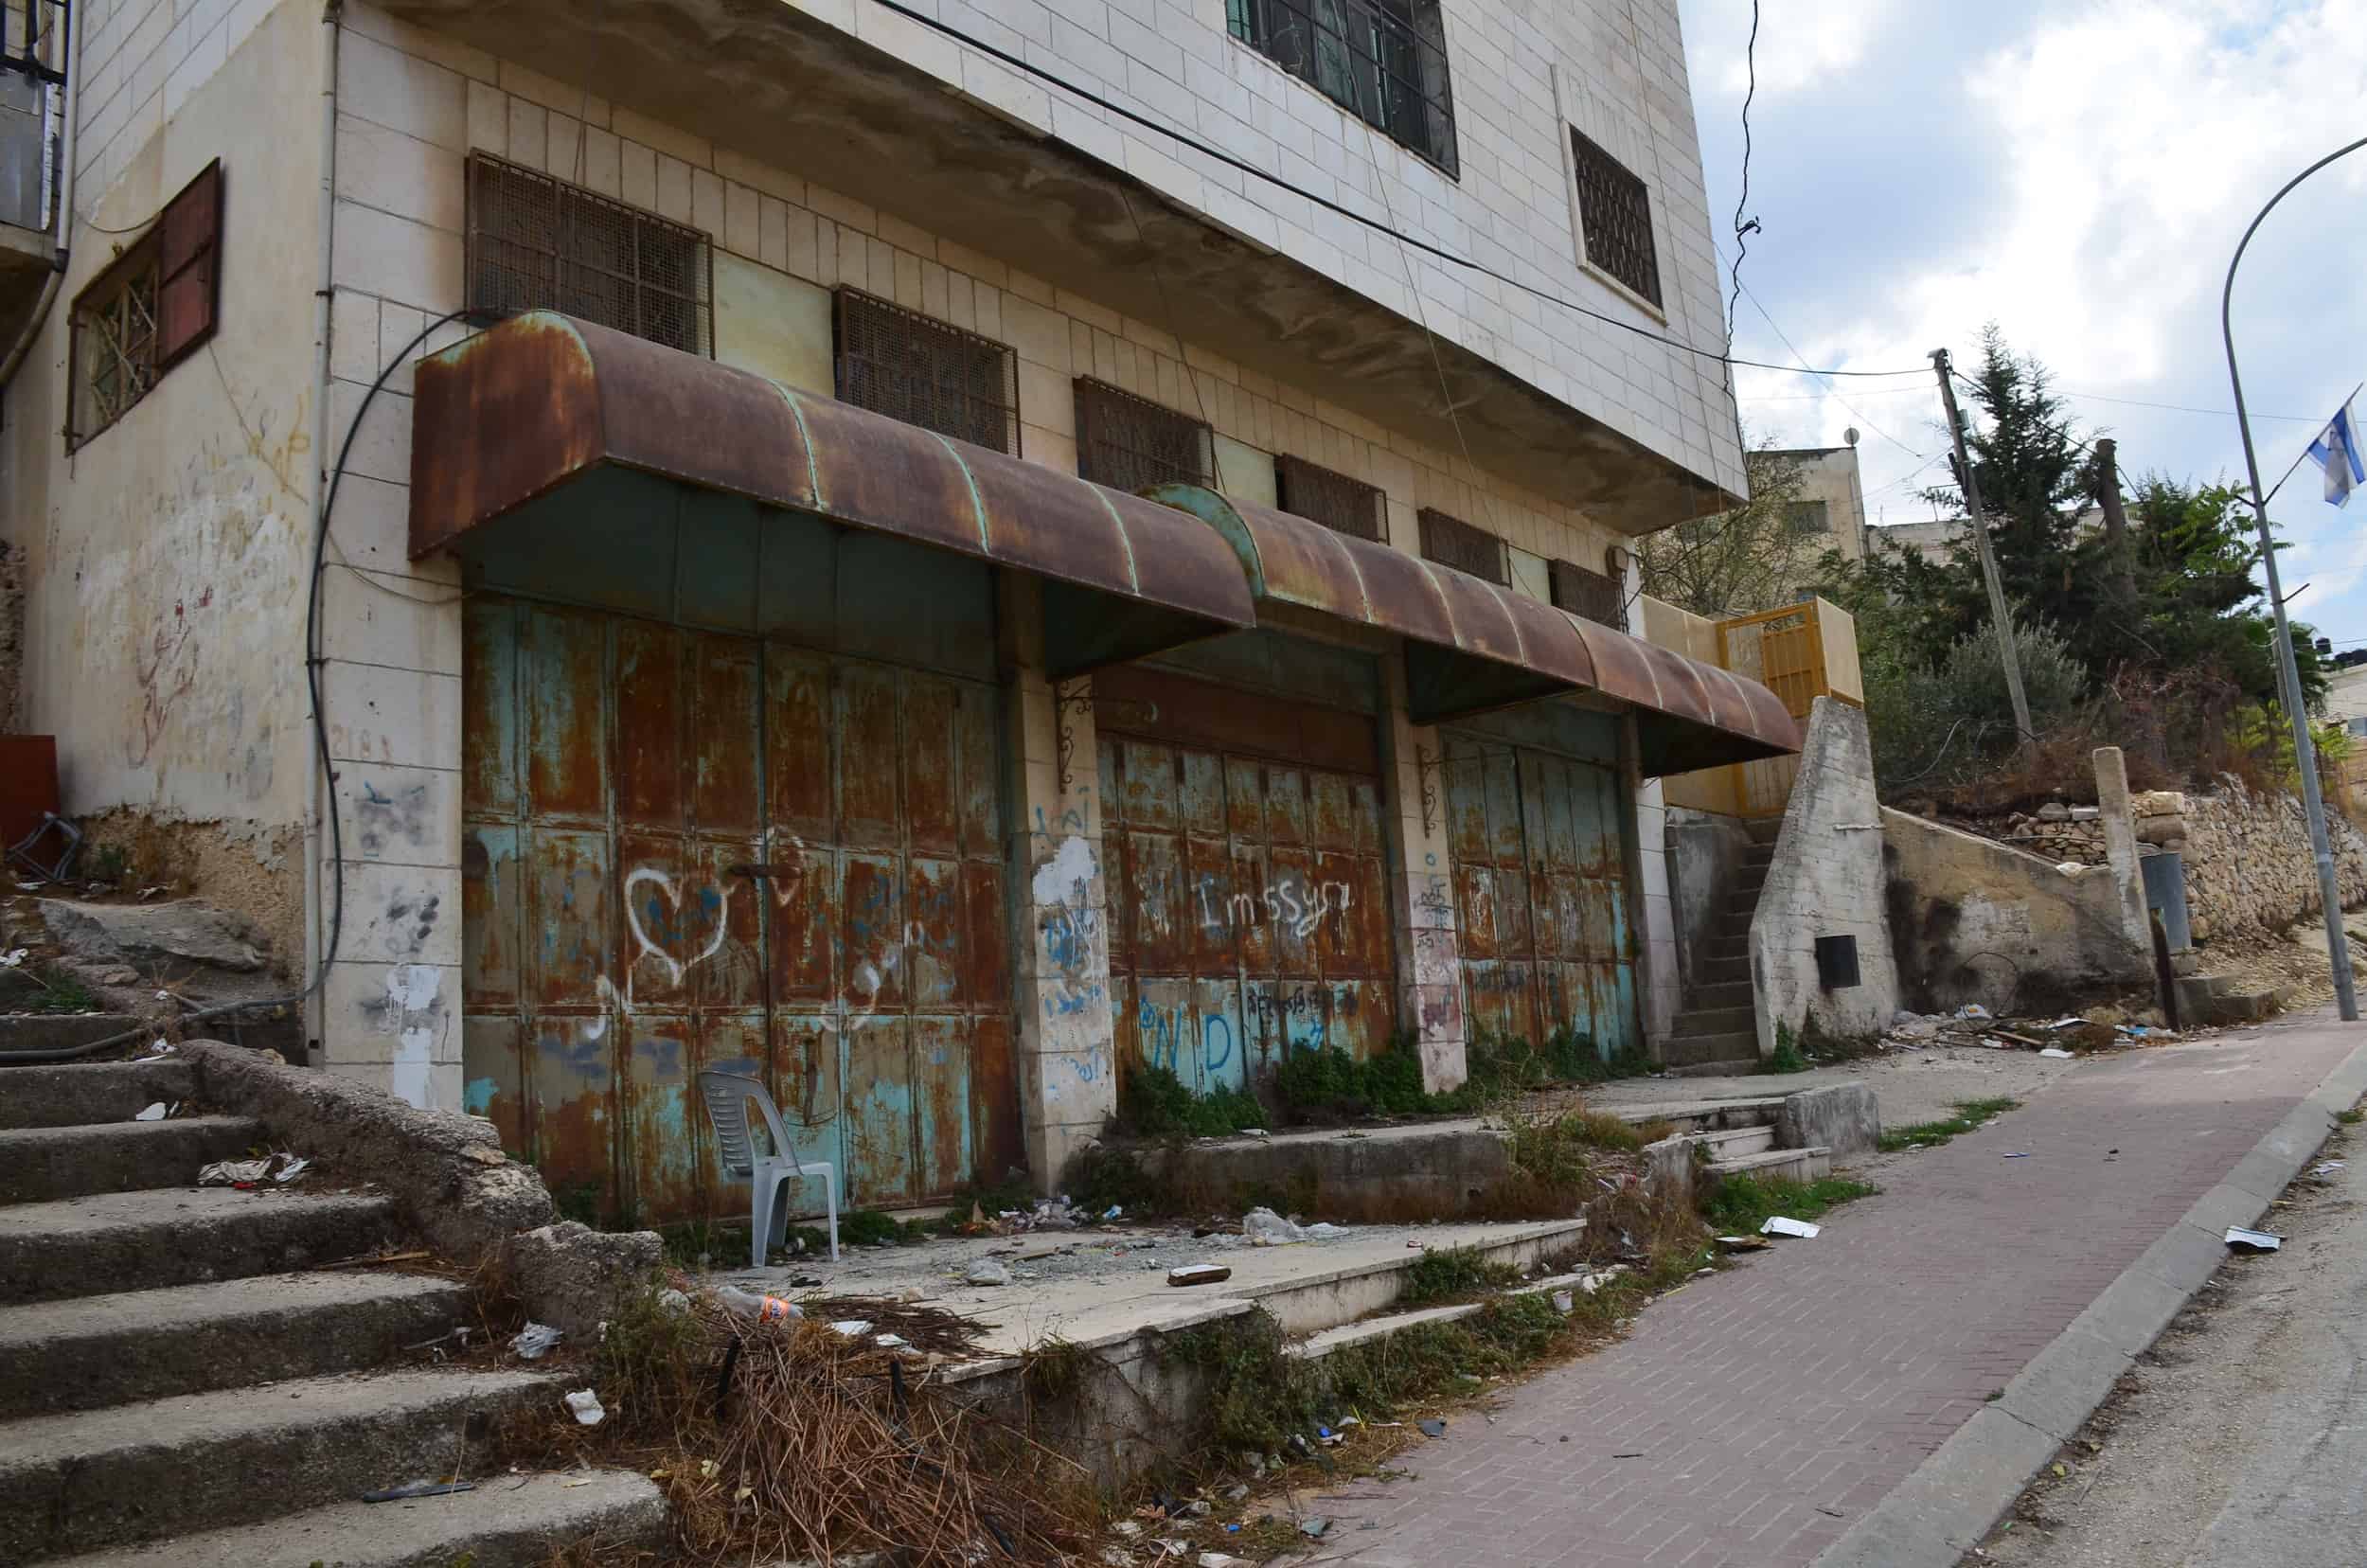 Closed Palestinian shops in Hebron, Palestine